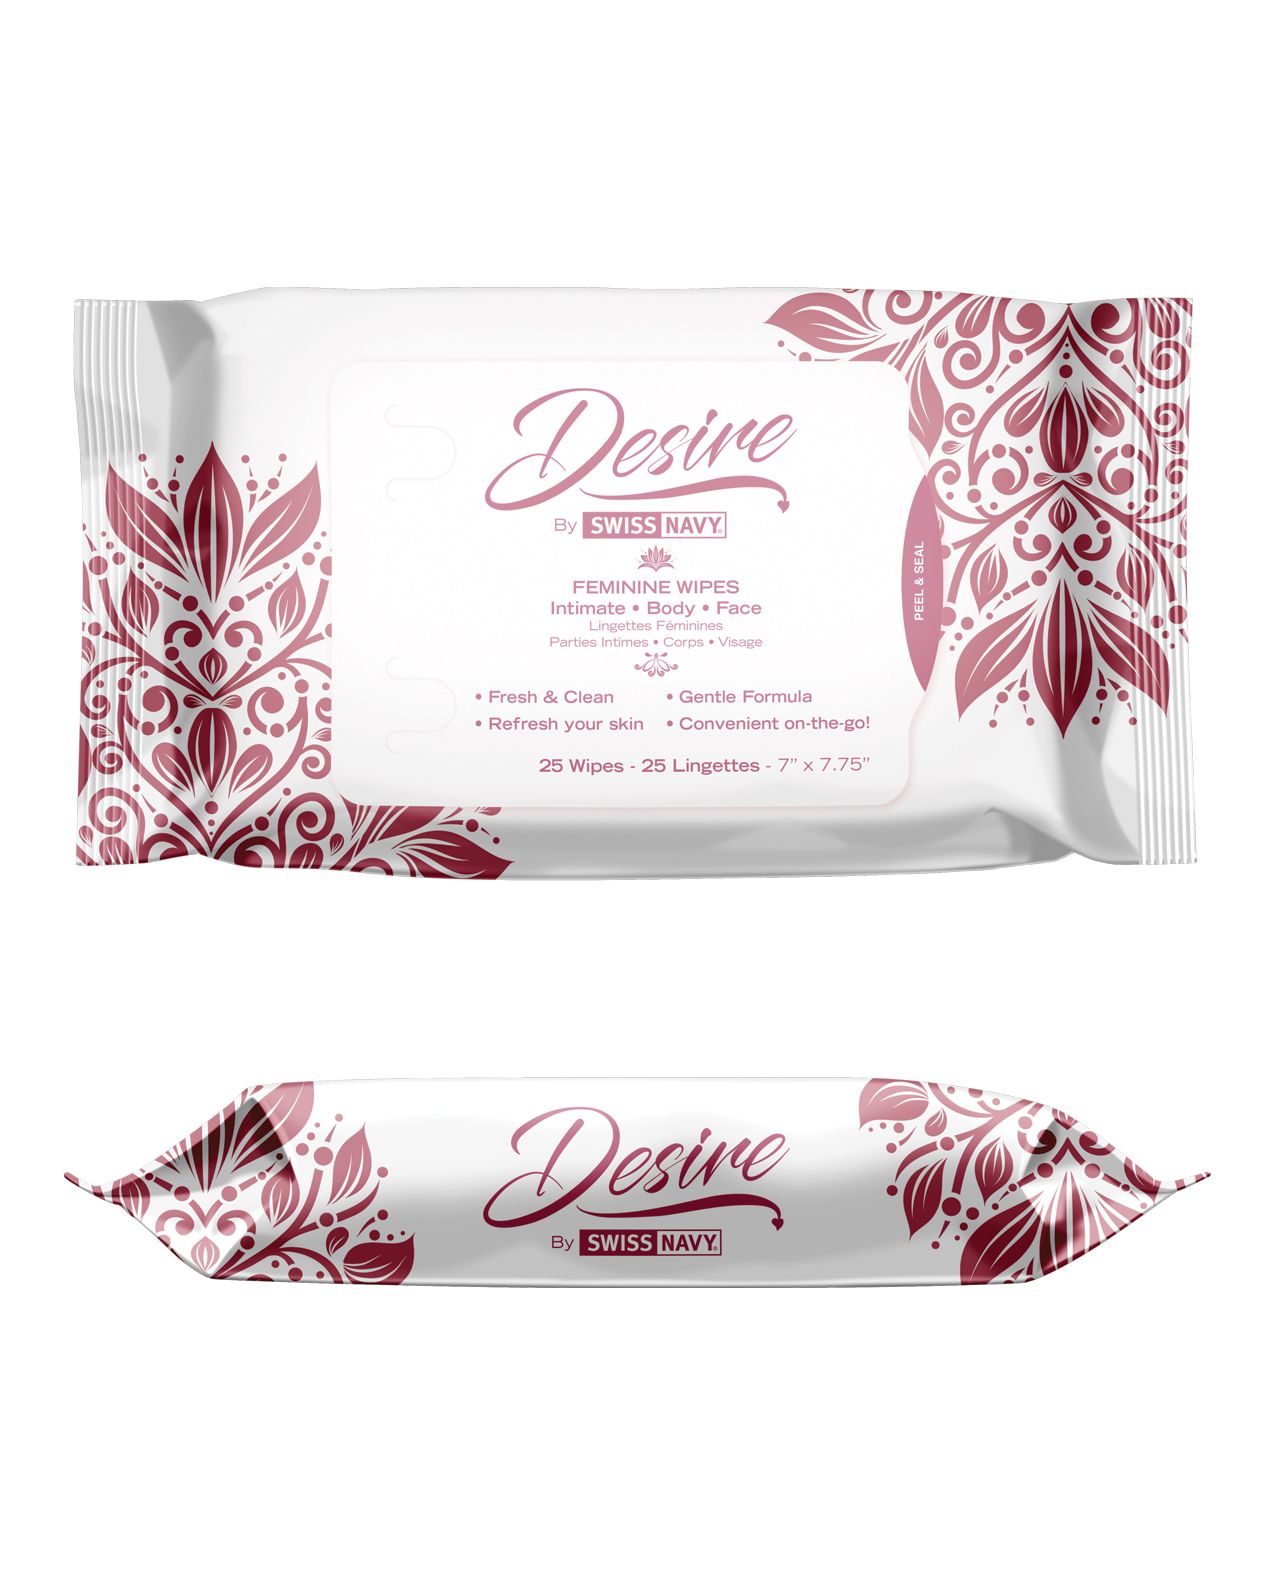 Swiss Navy Desire Unscented Feminine Wipes - Pack of 25 Shipmysextoys